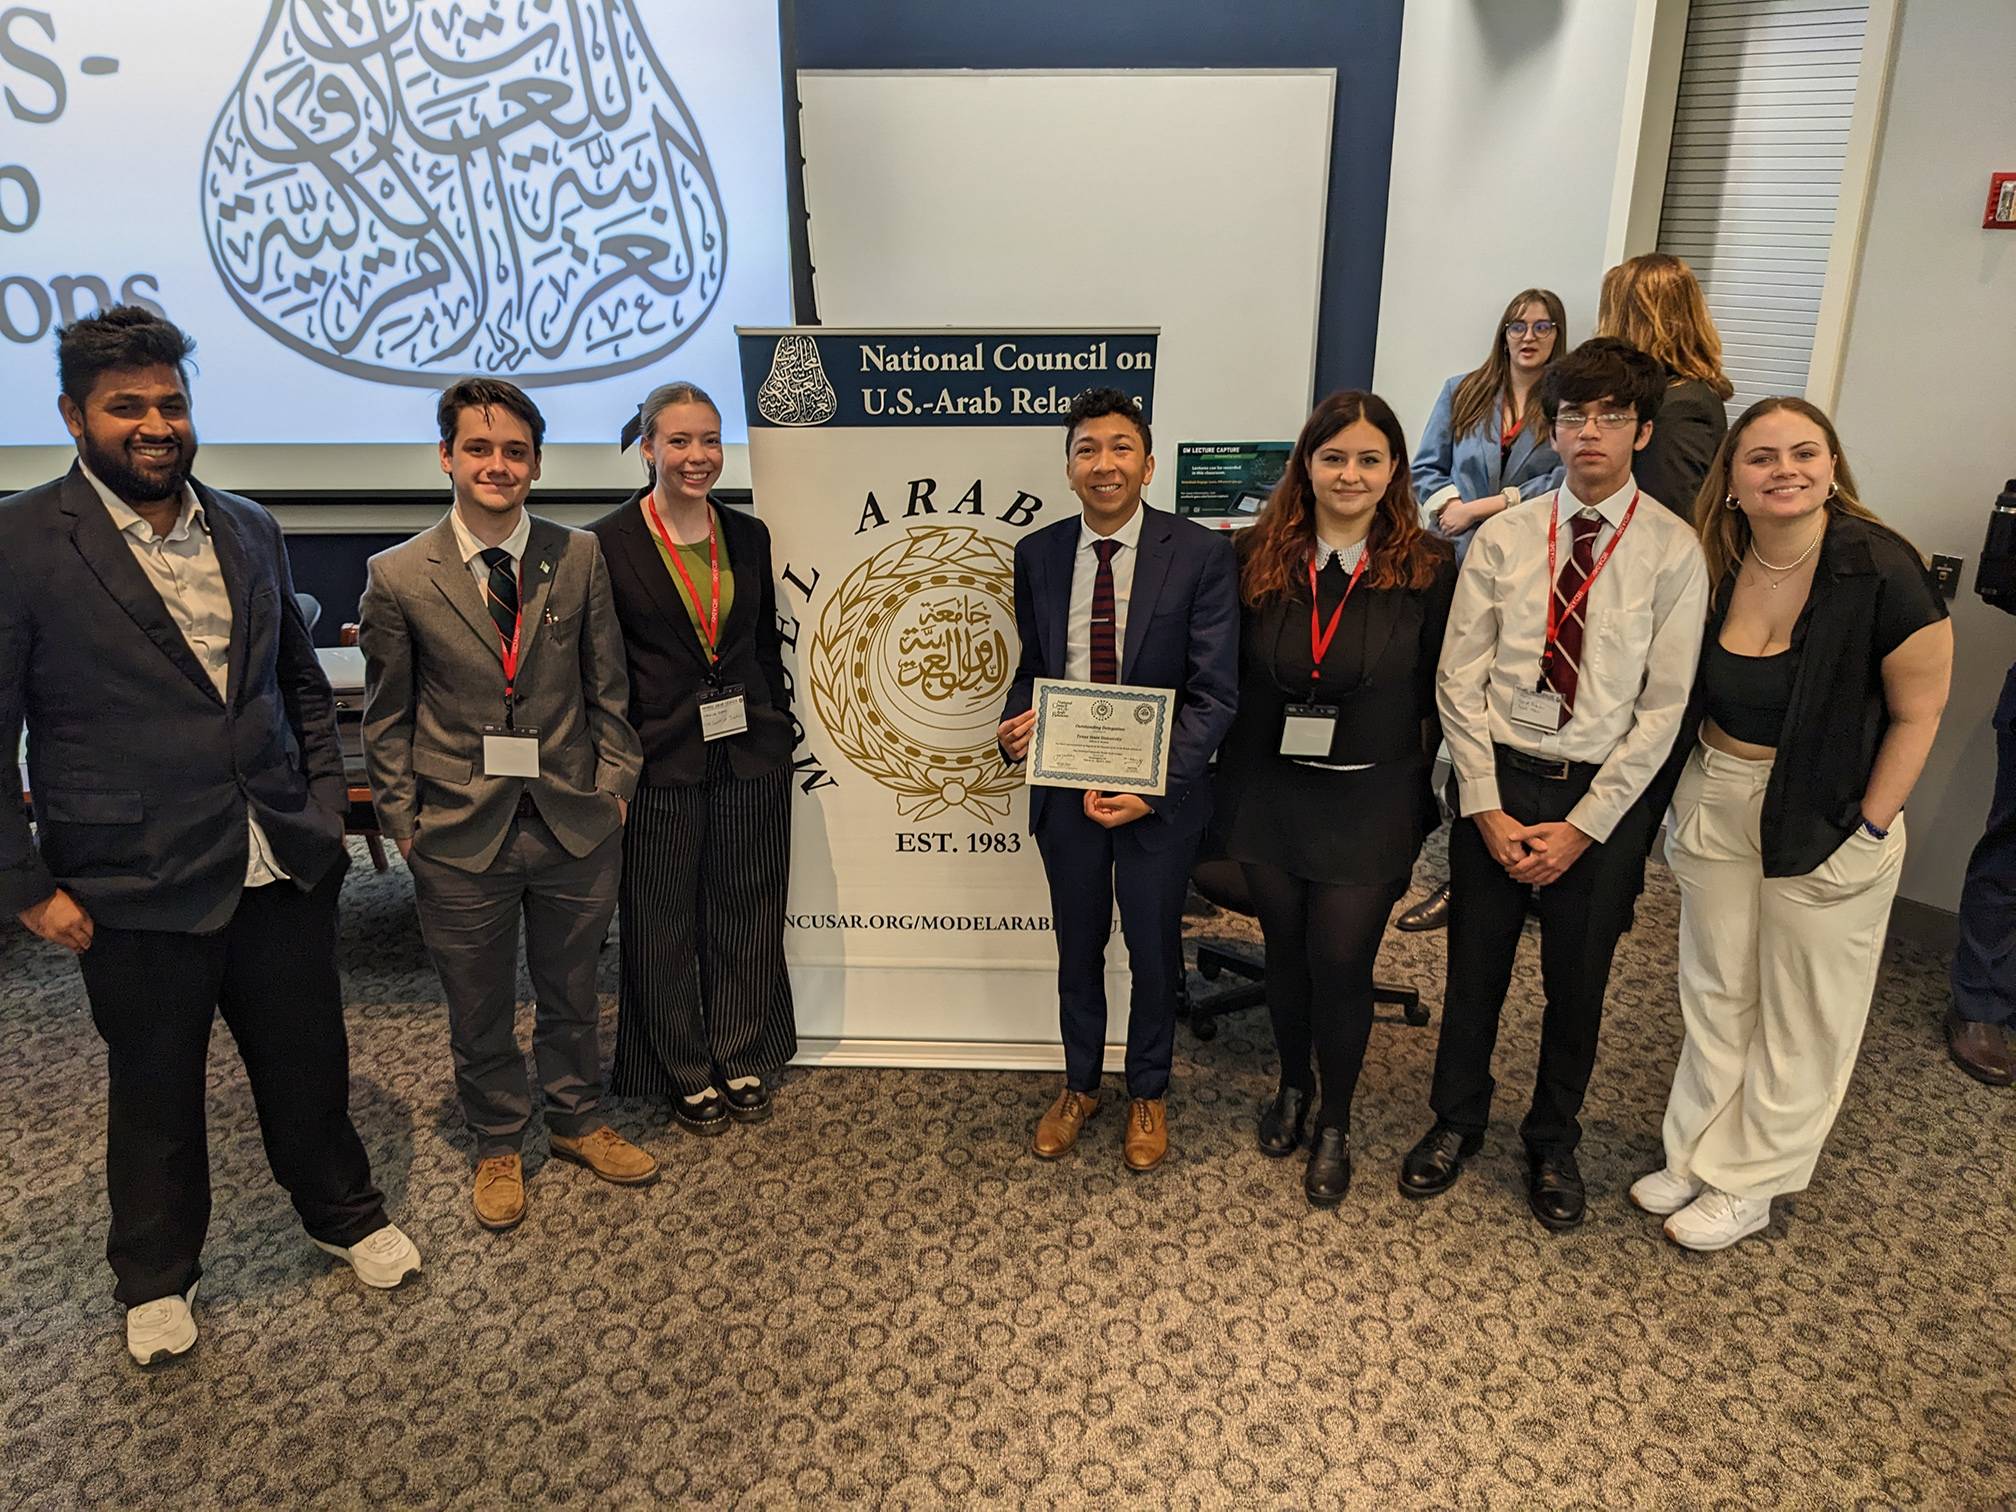 group of student in business attire at model arab league meeting